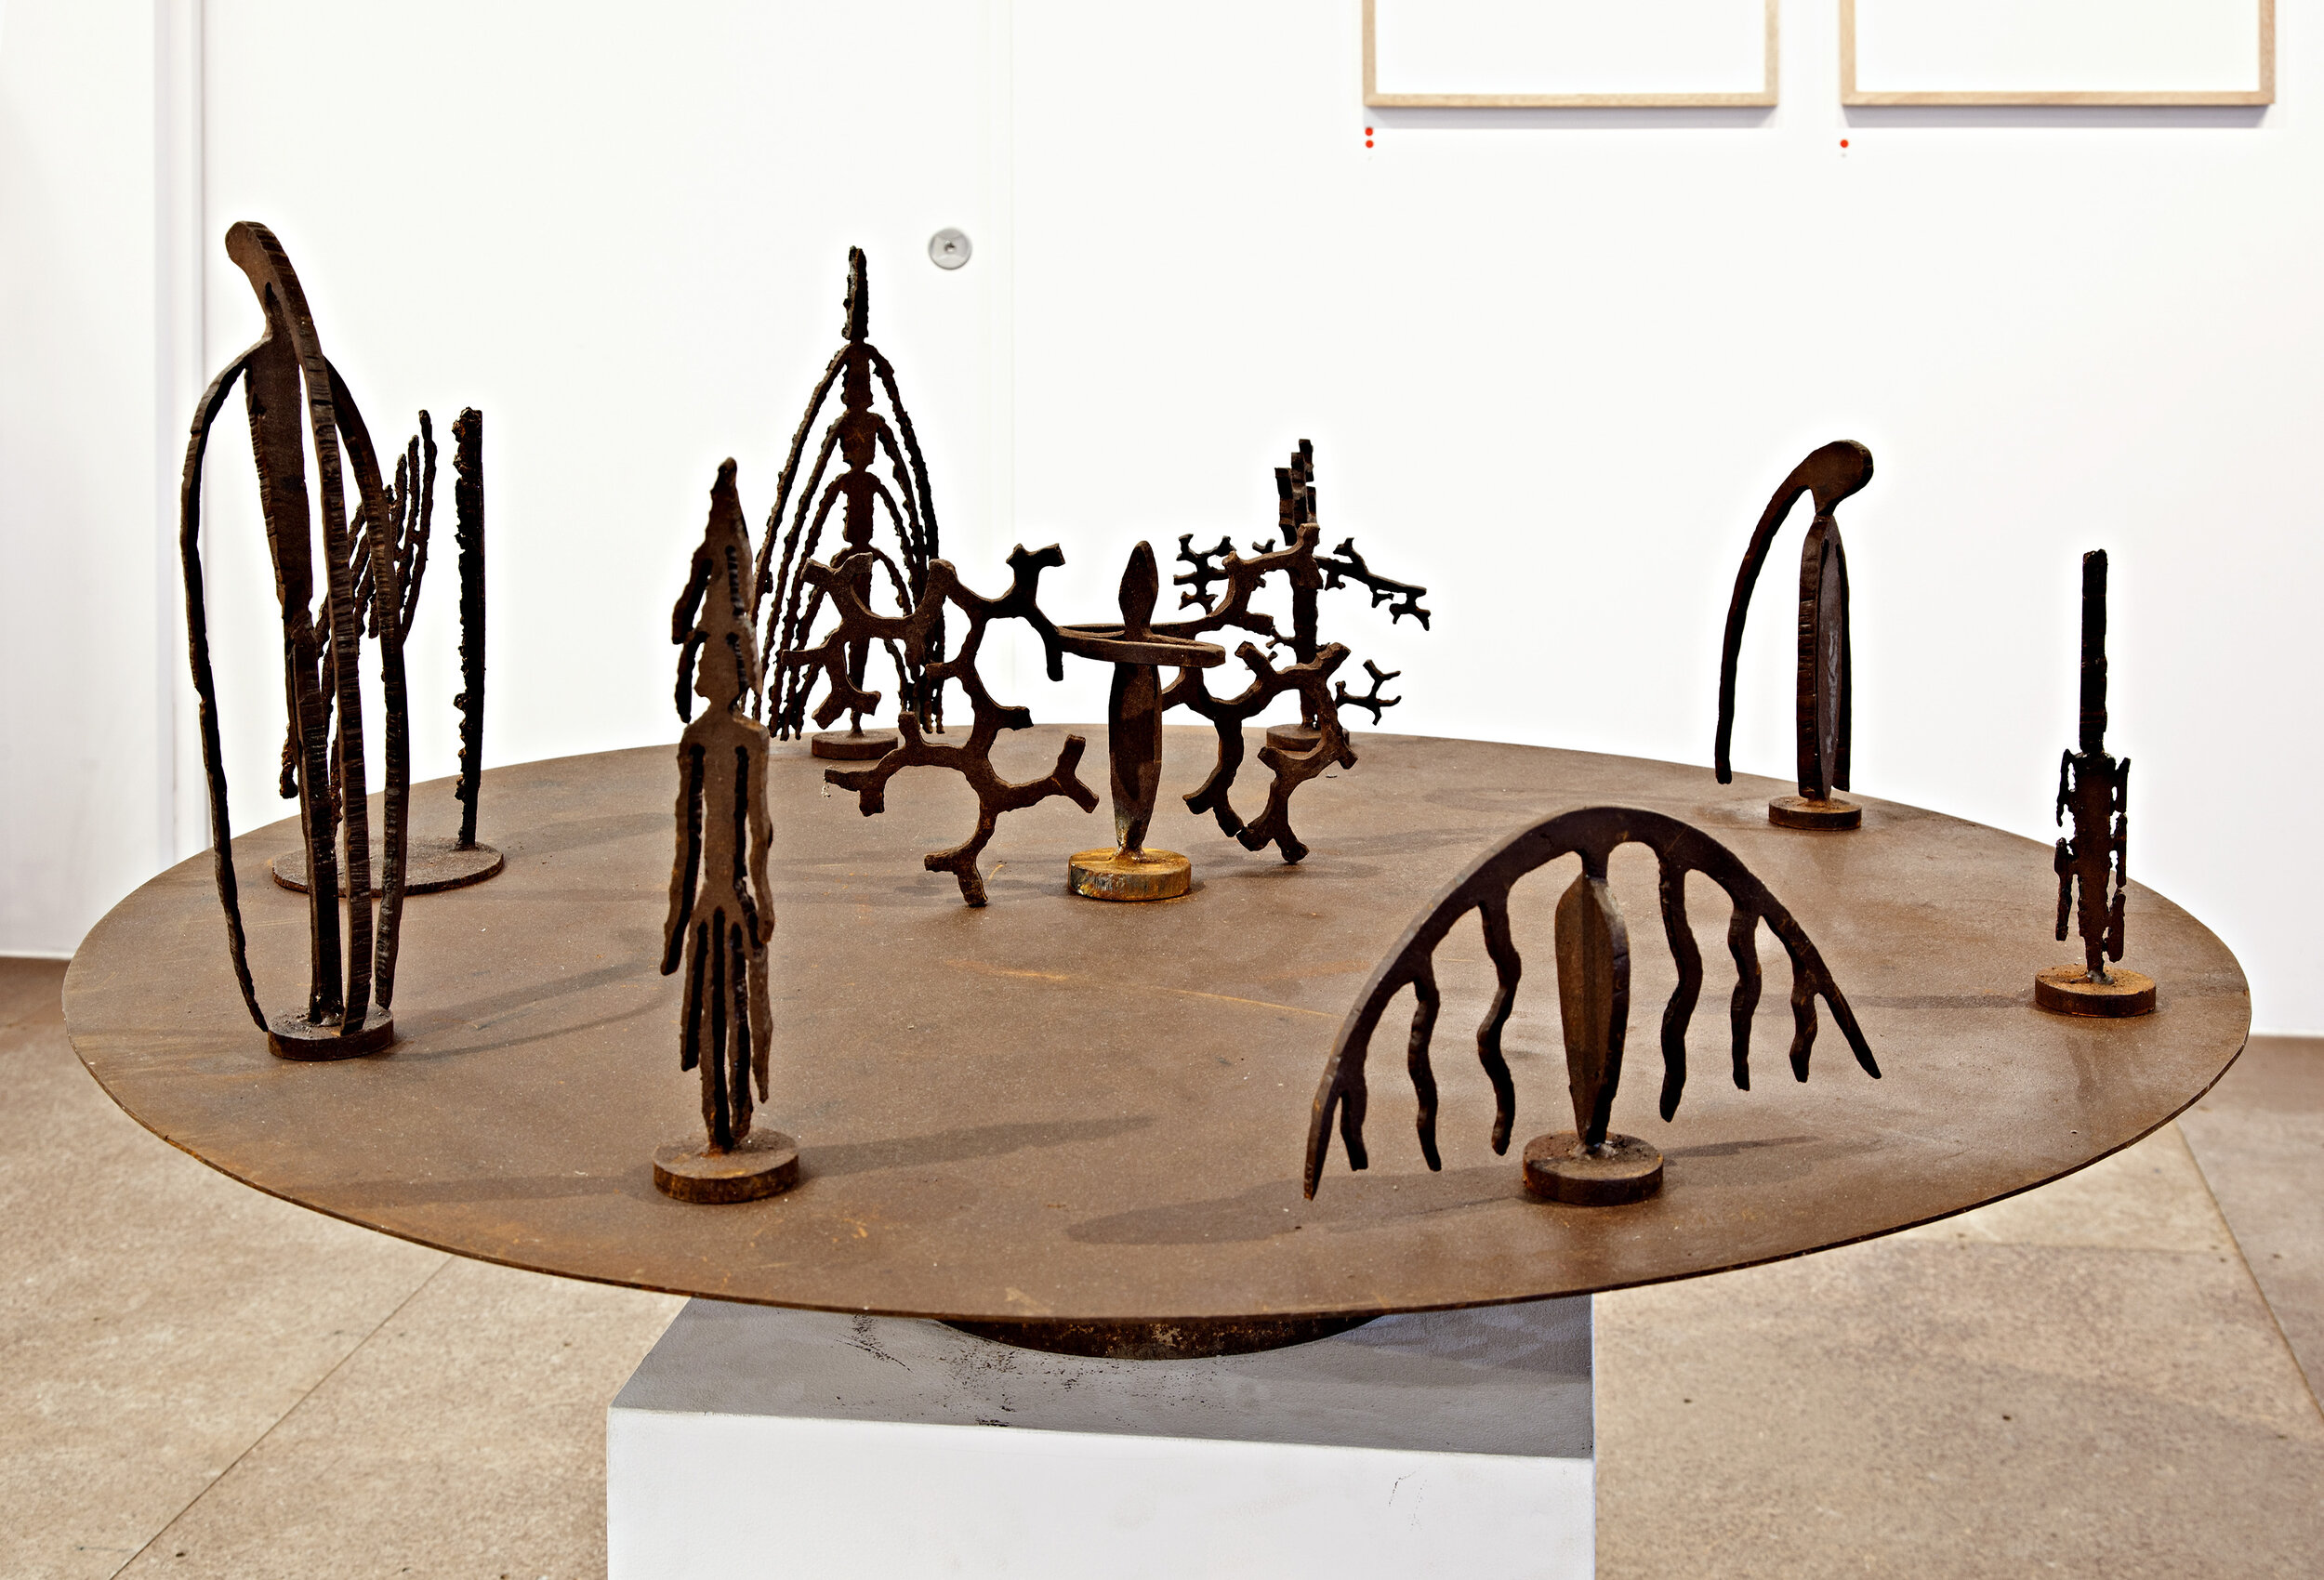 Theatre of the round. 2018 Mild steel, Corten steel 60 x 120 x 120 cm overall $19,500  each piece variable dimensions  $1,500 (1 of 5)